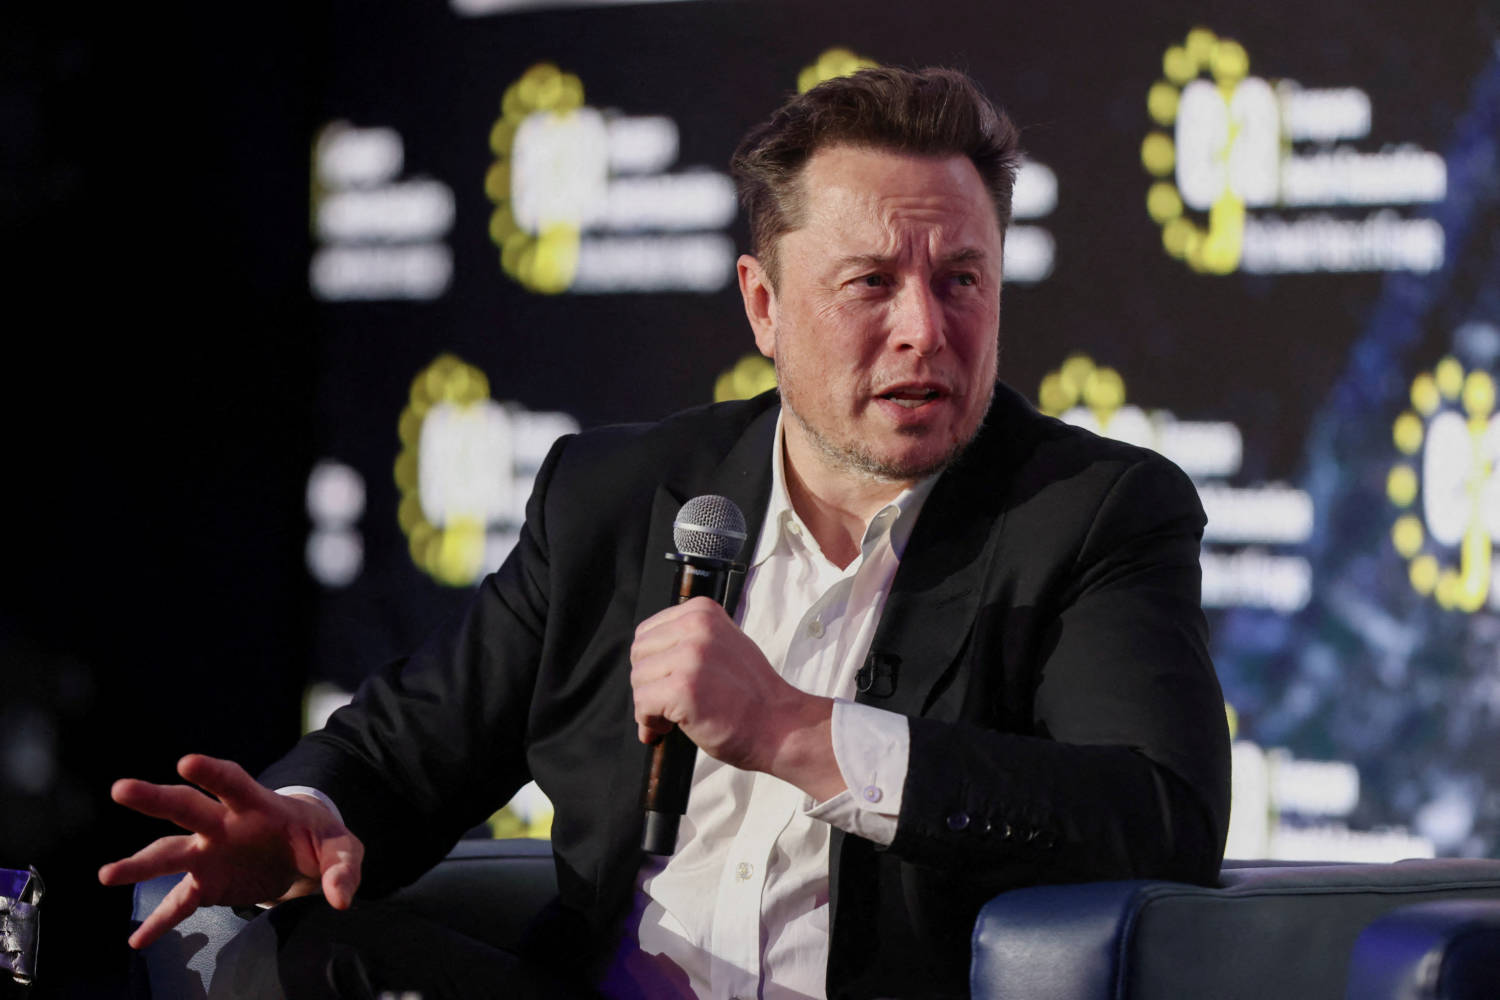 File Photo: Tesla Ceo Musk Attends A Conference Organized By The European Jewish Association, In Krakow